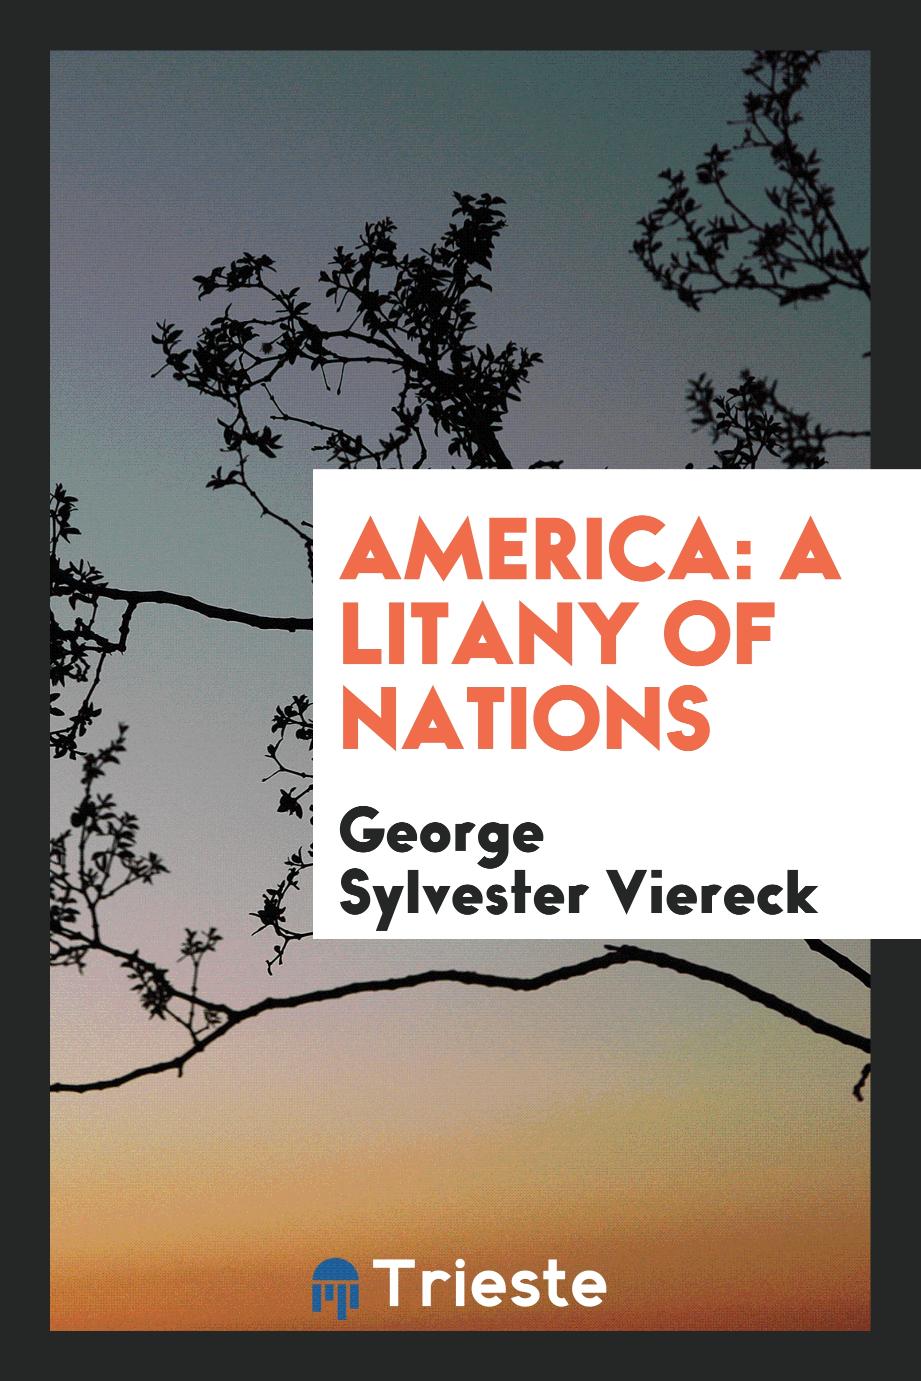 America: A Litany of Nations